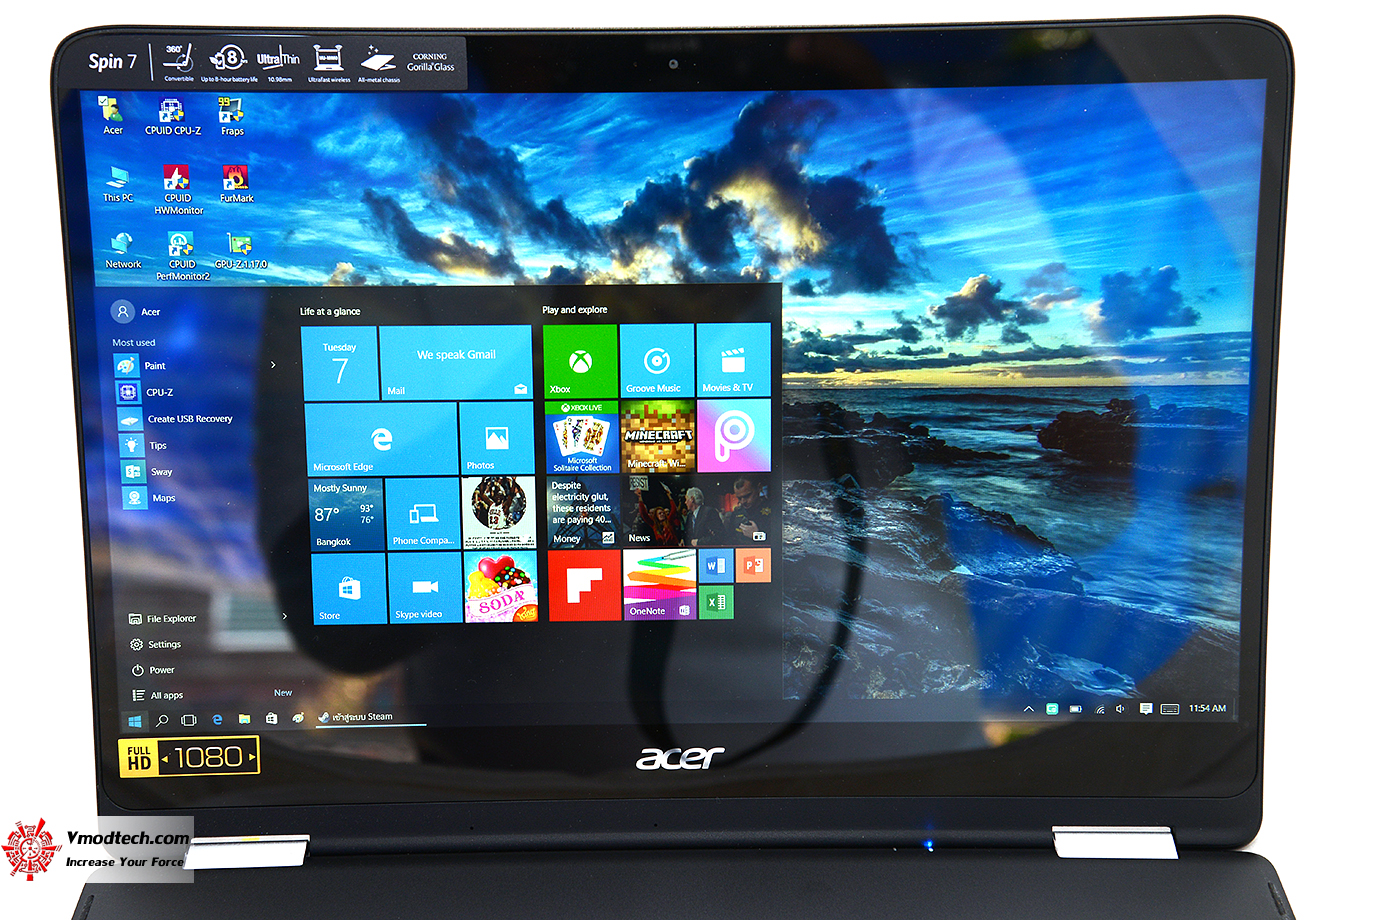 dsc 4063 Acer Spin7 Review